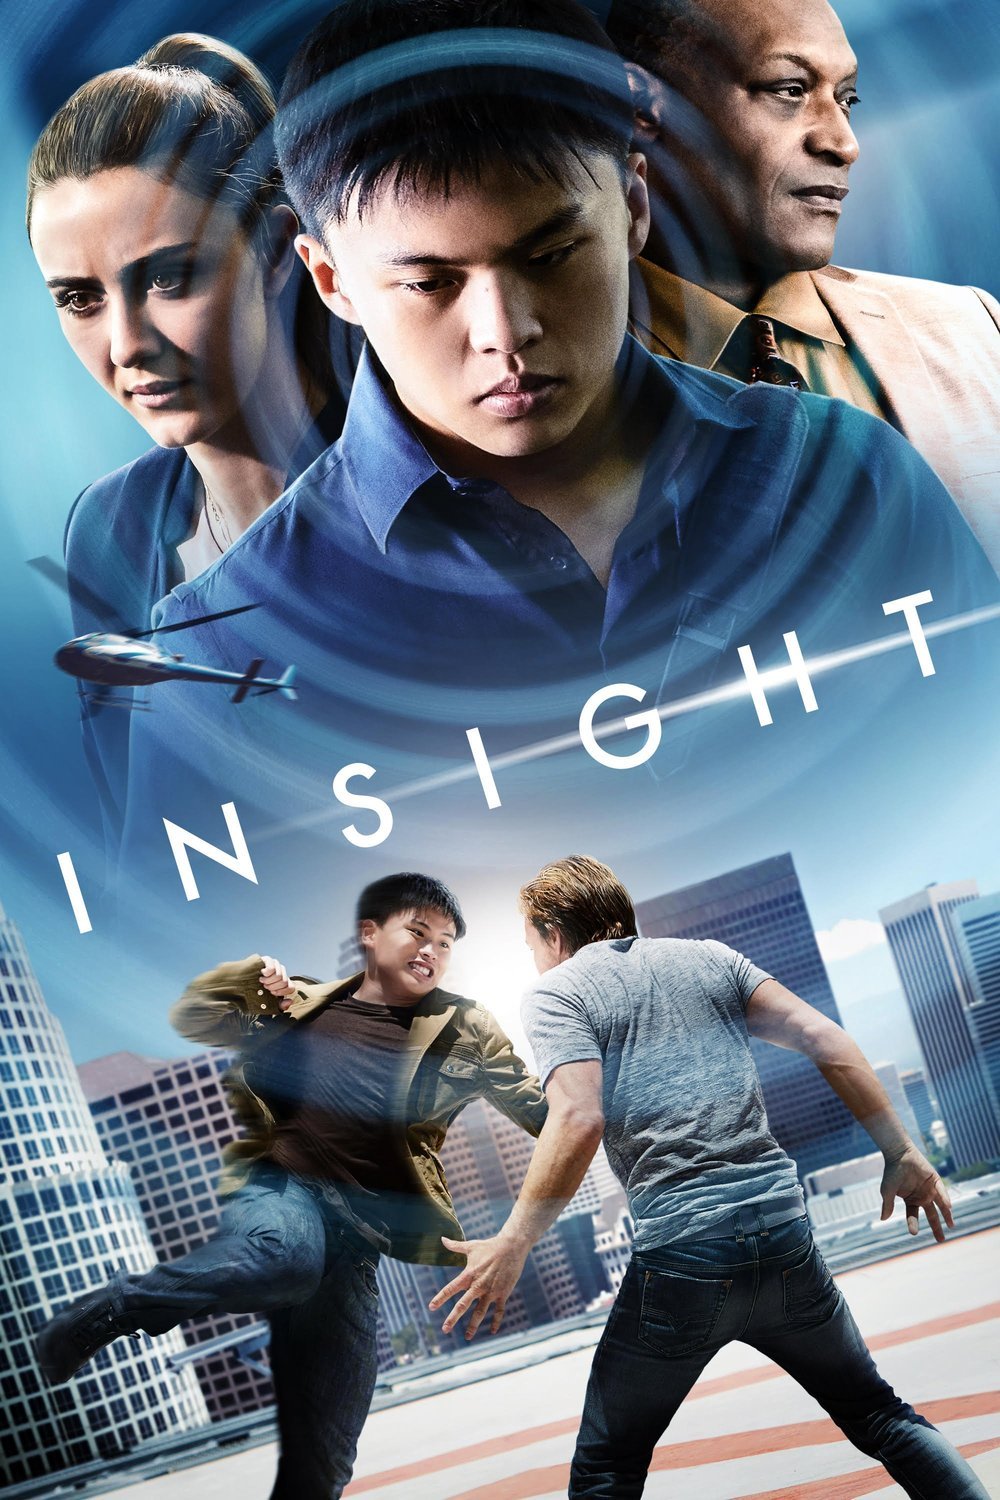 Poster of the movie Insight